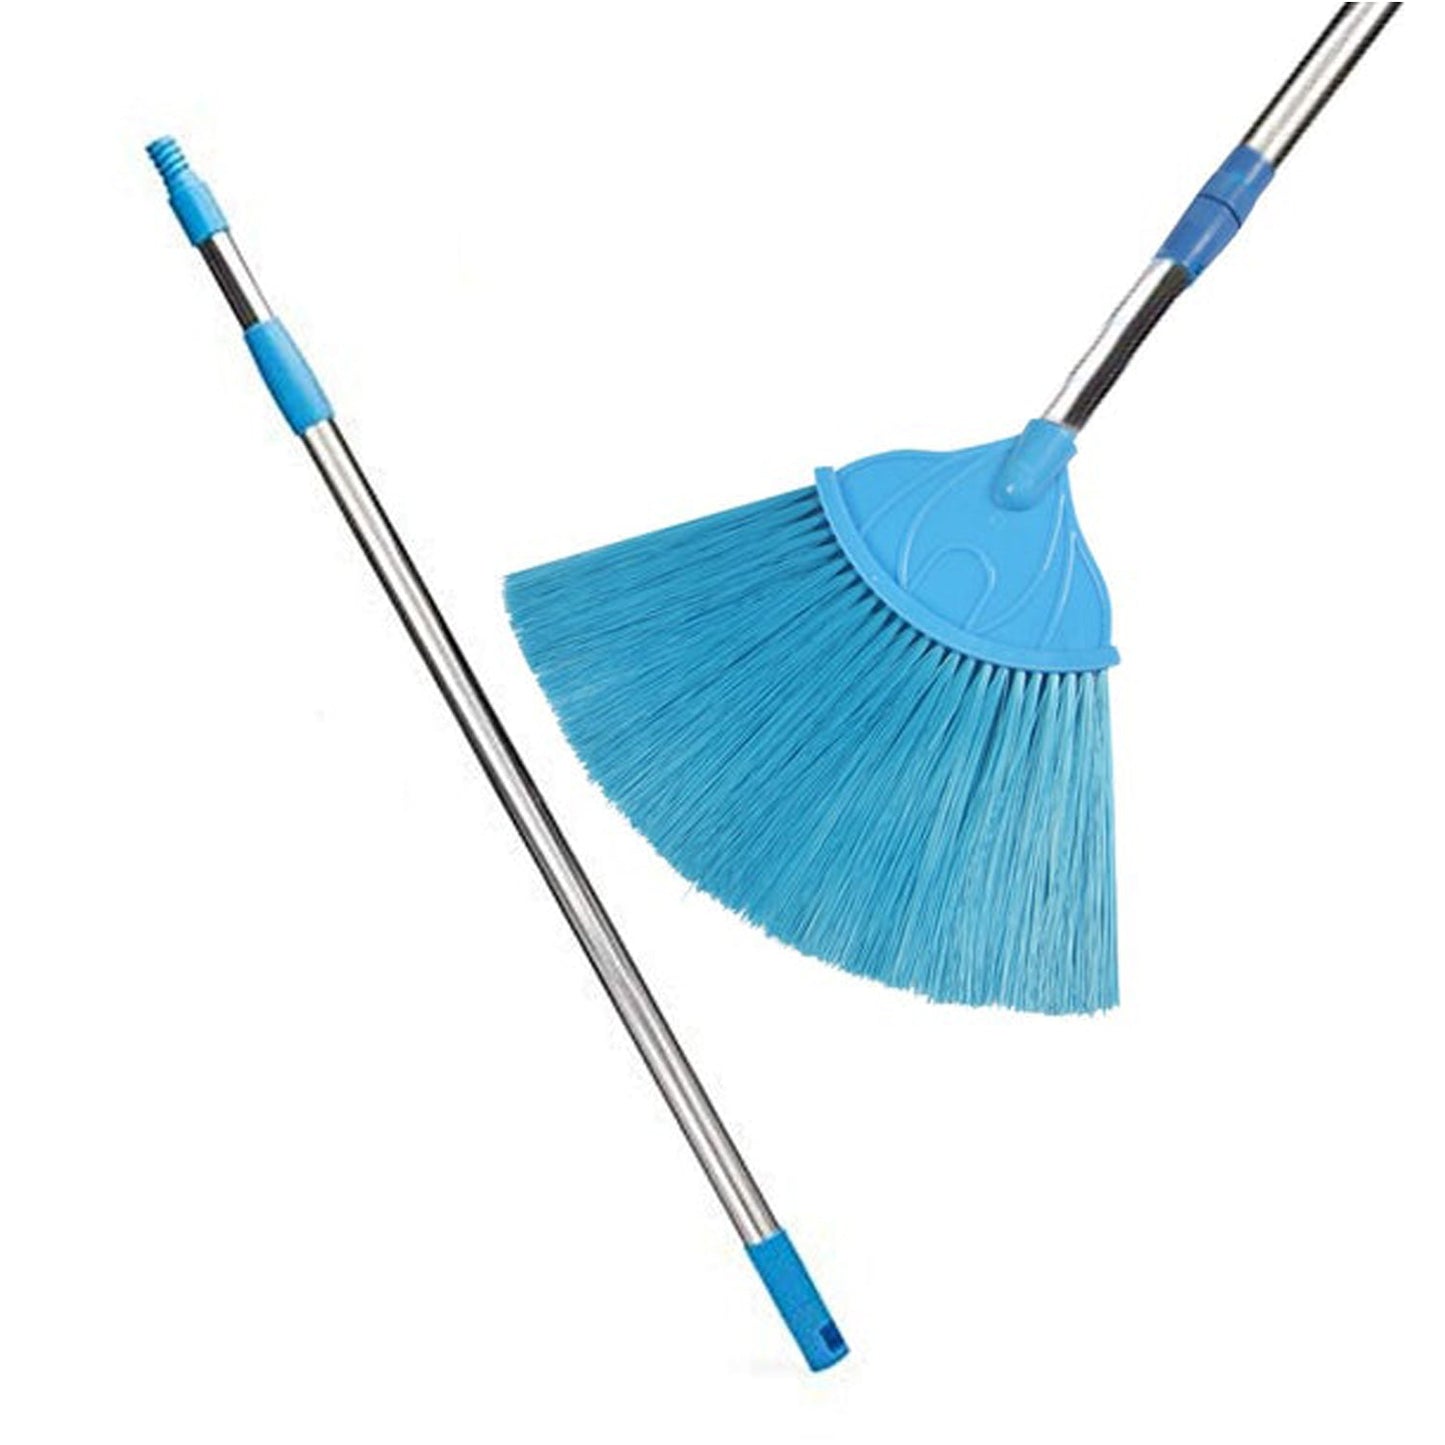 4779 Ceiling Broom Fan for cleaning and wiping over dusty floor surfaces with effective performance. DeoDap